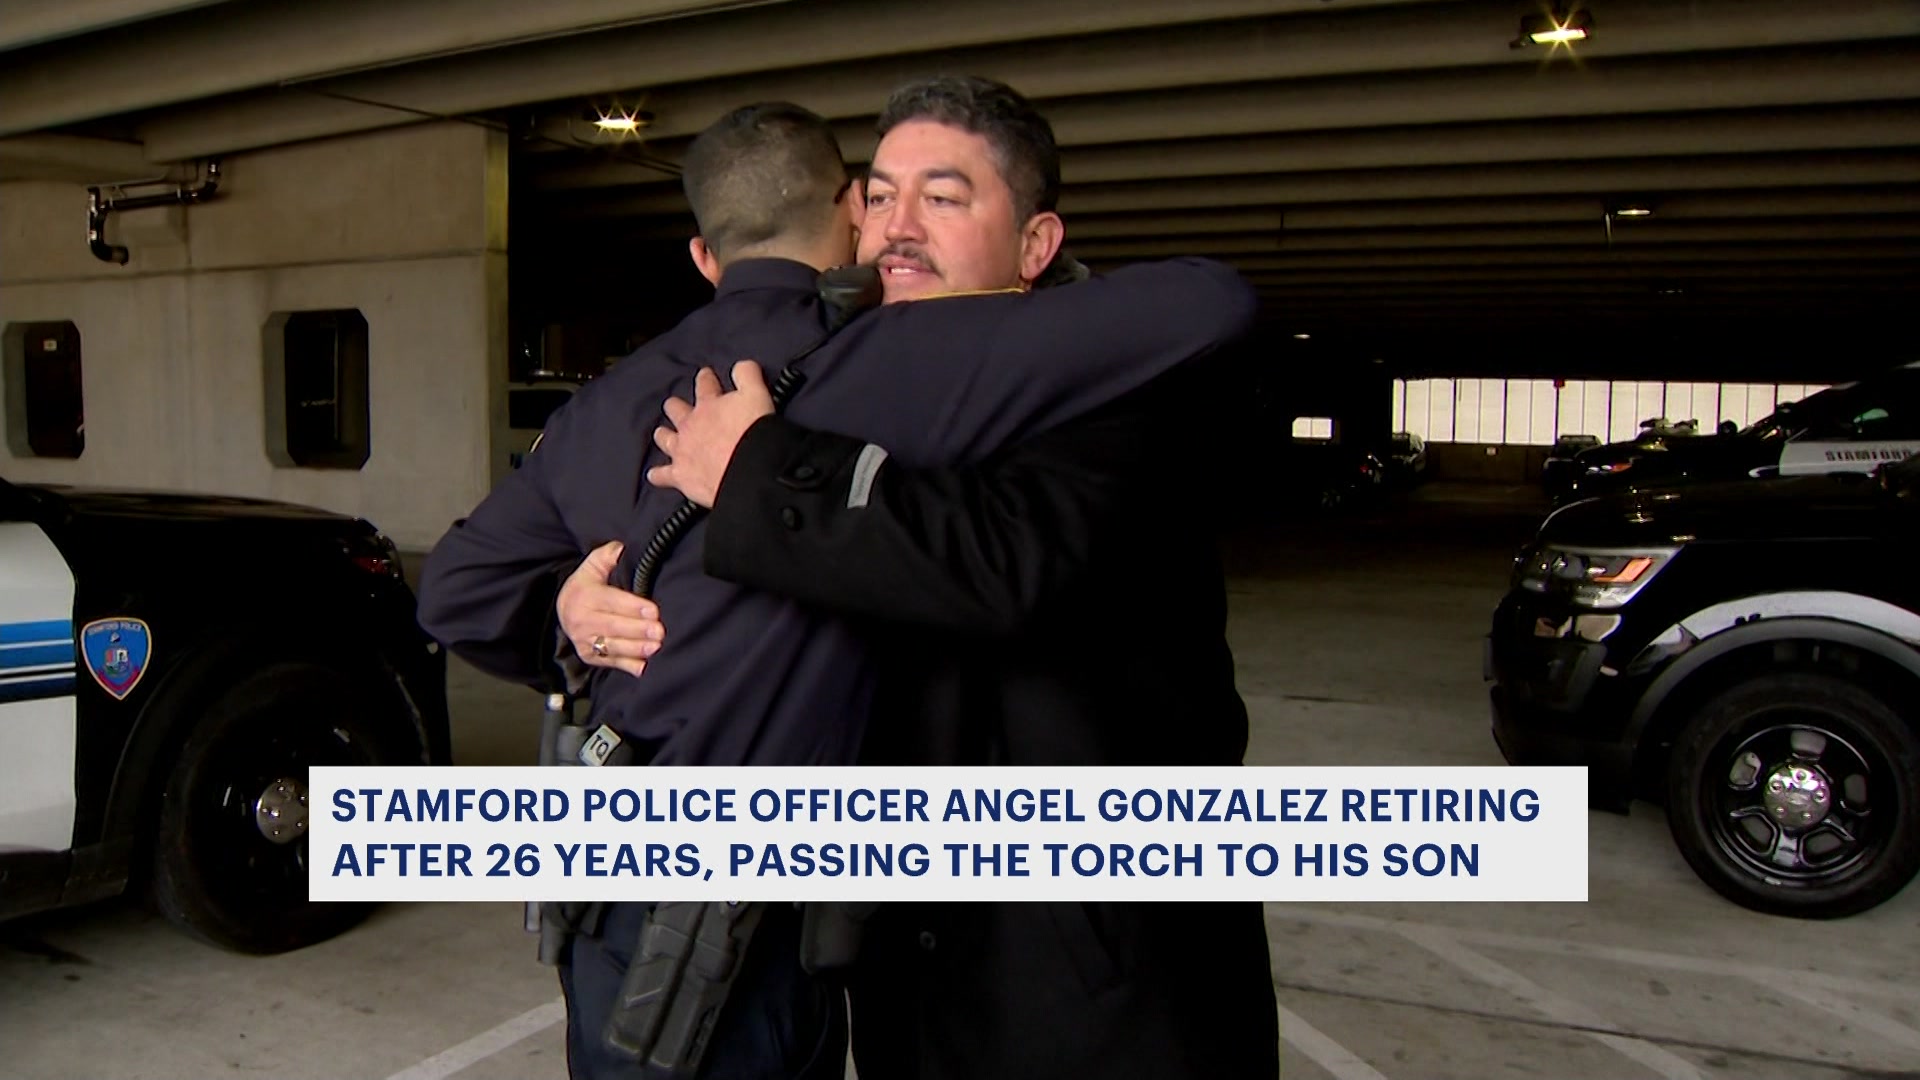 Stamford police officer retires after 26 years, passes torch to his son